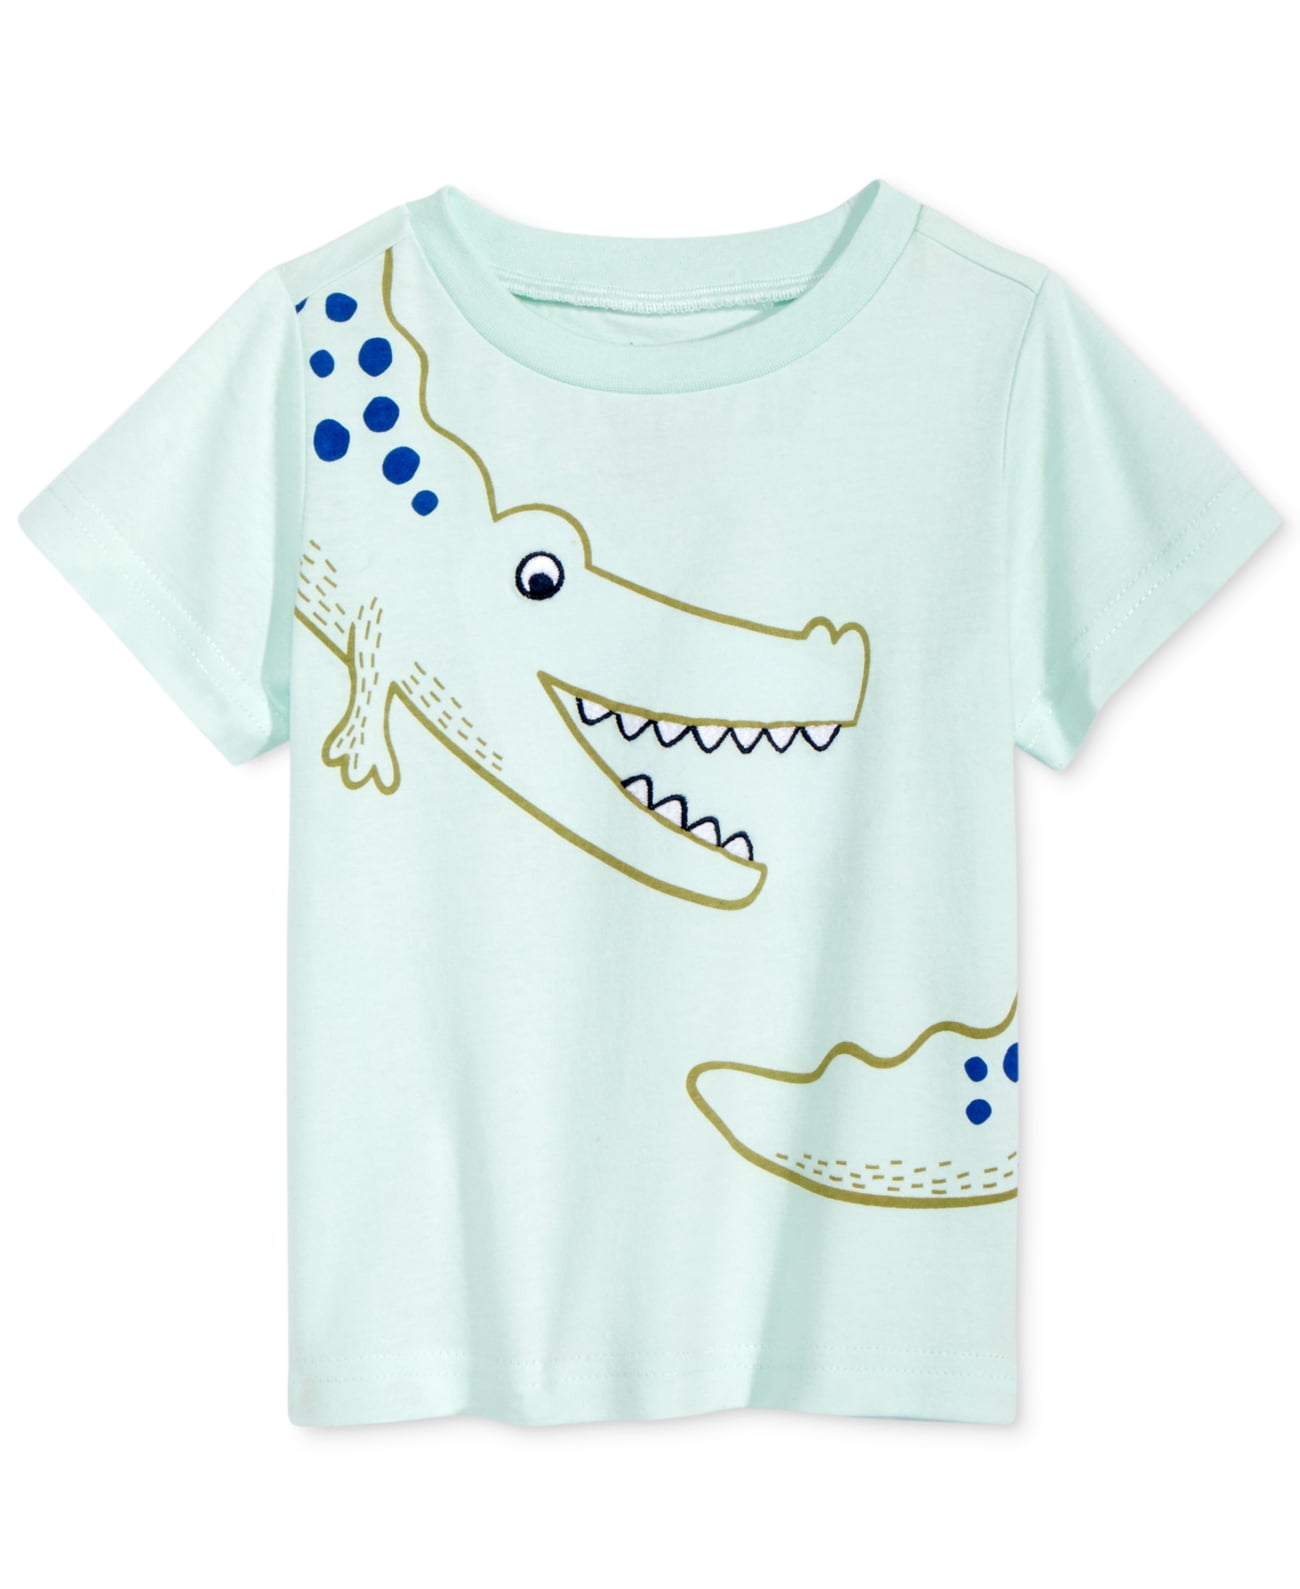 First Impressions Graphic-Print Cotton T-Shirt, Alligator Baby Boys ...